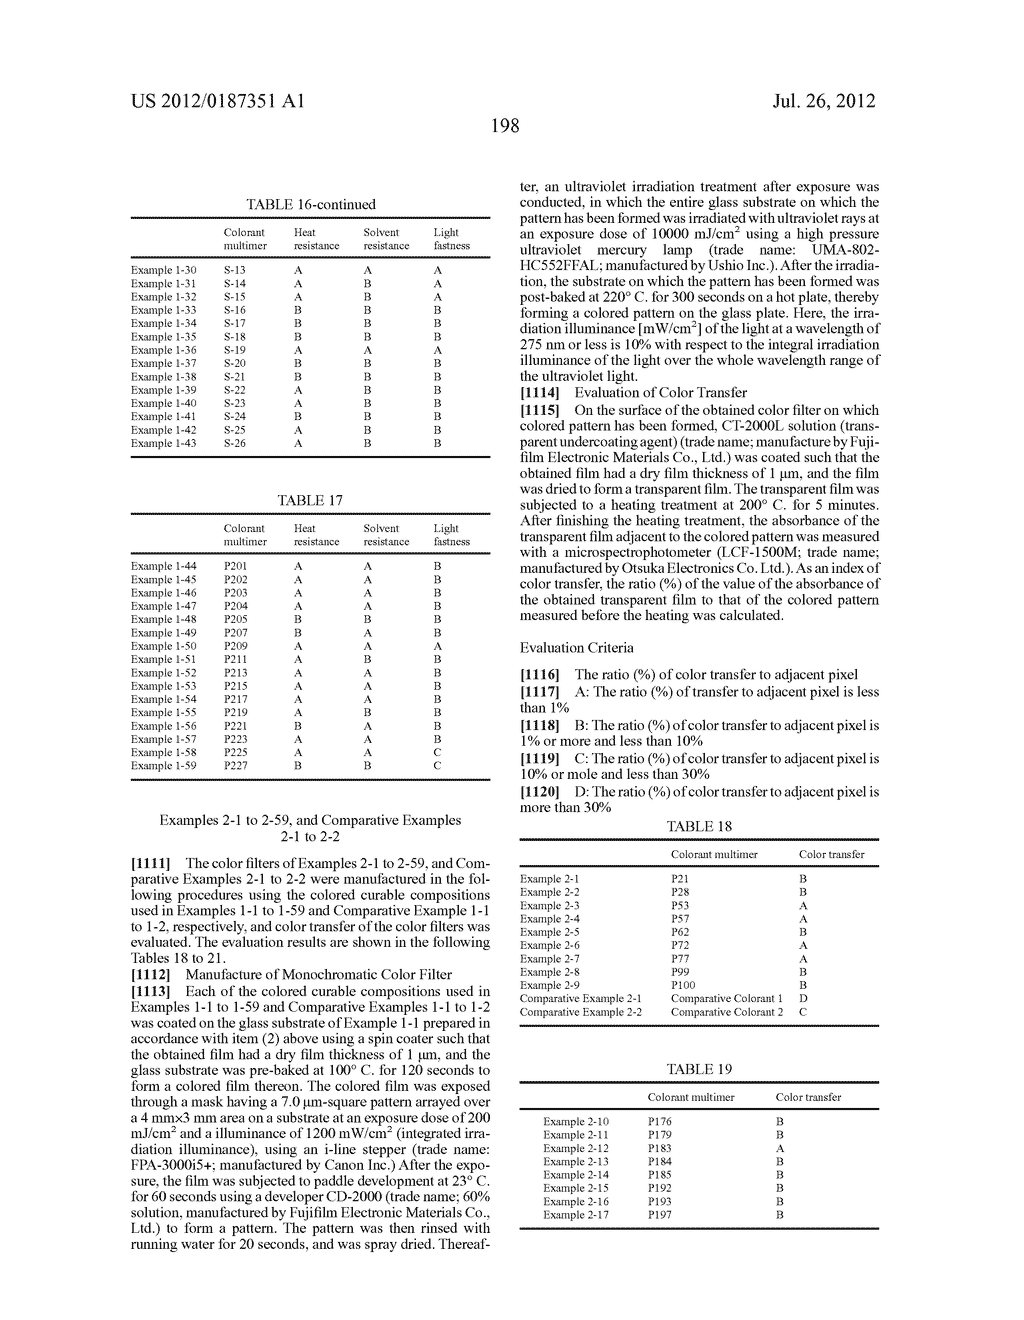 COLORANT MULTIMER, COLORED CURABLE COMPOSITION, COLOR FILTER AND METHOD     FOR PRODUCING THE SAME, AND SOLID-STATE IMAGE SENSOR, IMAGE DISPLAY     DEVICE, LIQUID CRYSTAL DISPLAY DEVICE AND ORGANIC EL DISPLAY WITH THE     COLOR FILTER - diagram, schematic, and image 201